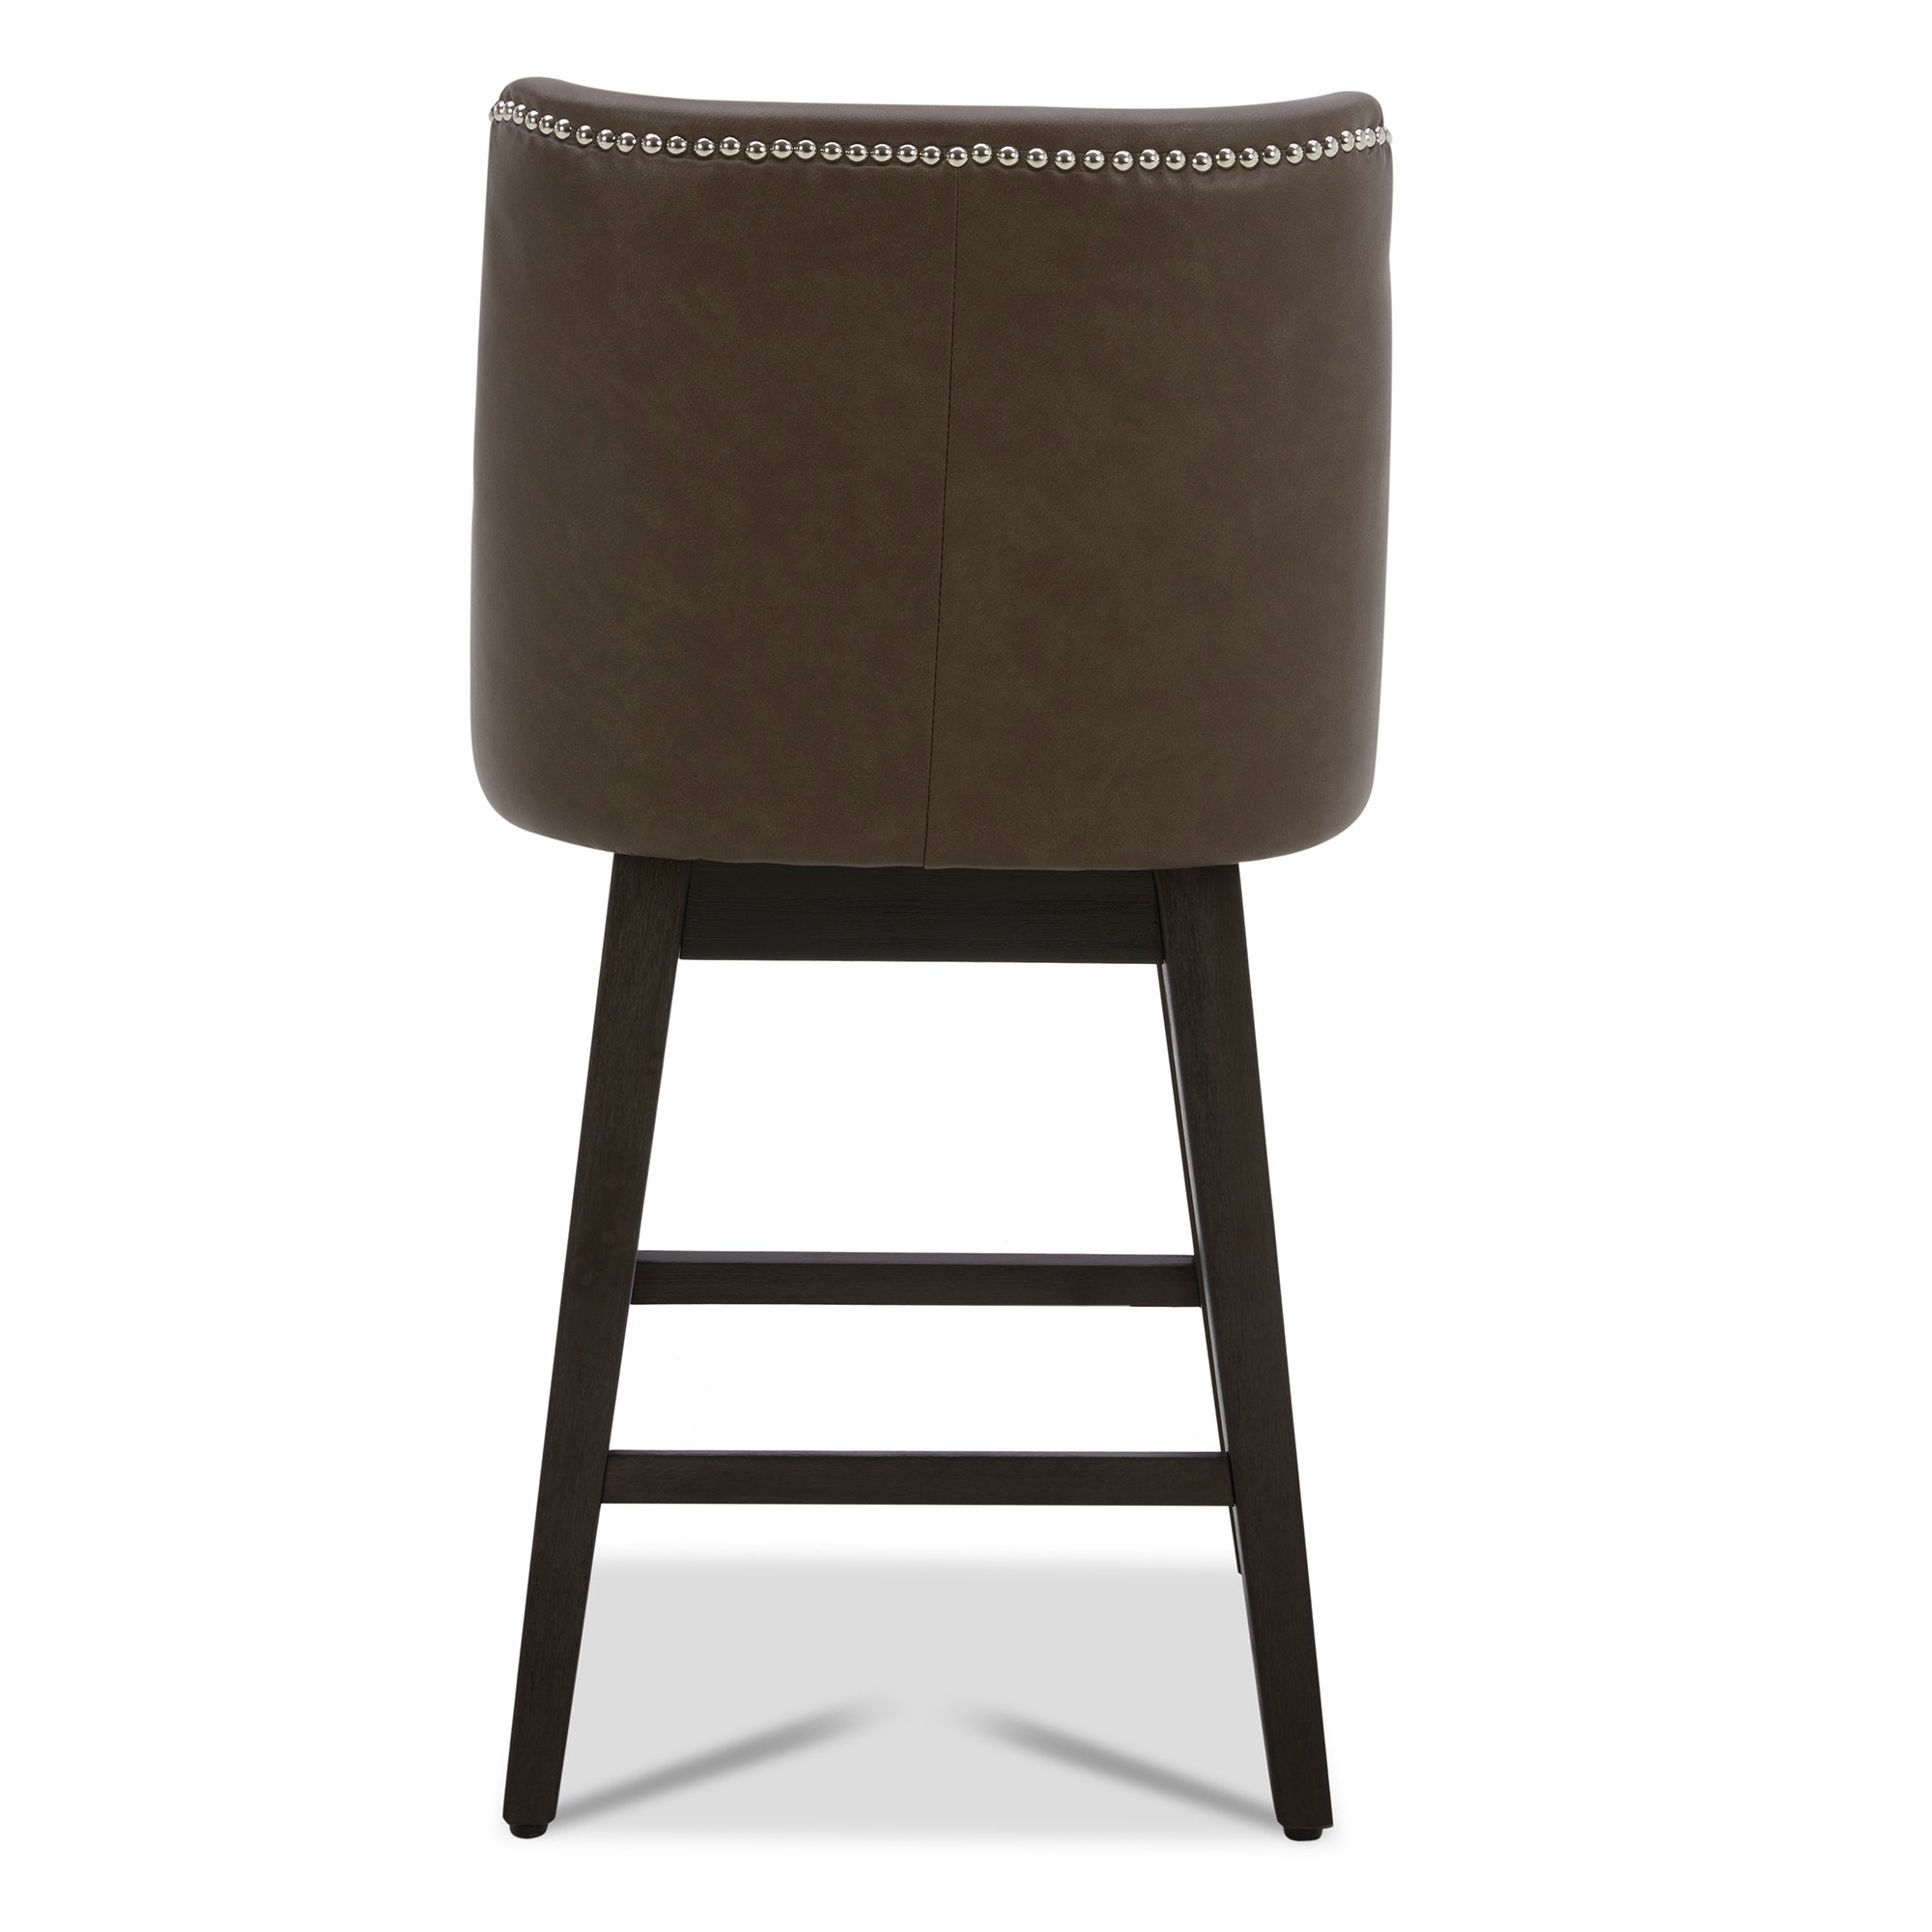 CHITA LIVING-Asher Swivel Counter Stool with Nailhead Trim( Set of 2)-Counter Stools-Faux Leather-Chocolate-